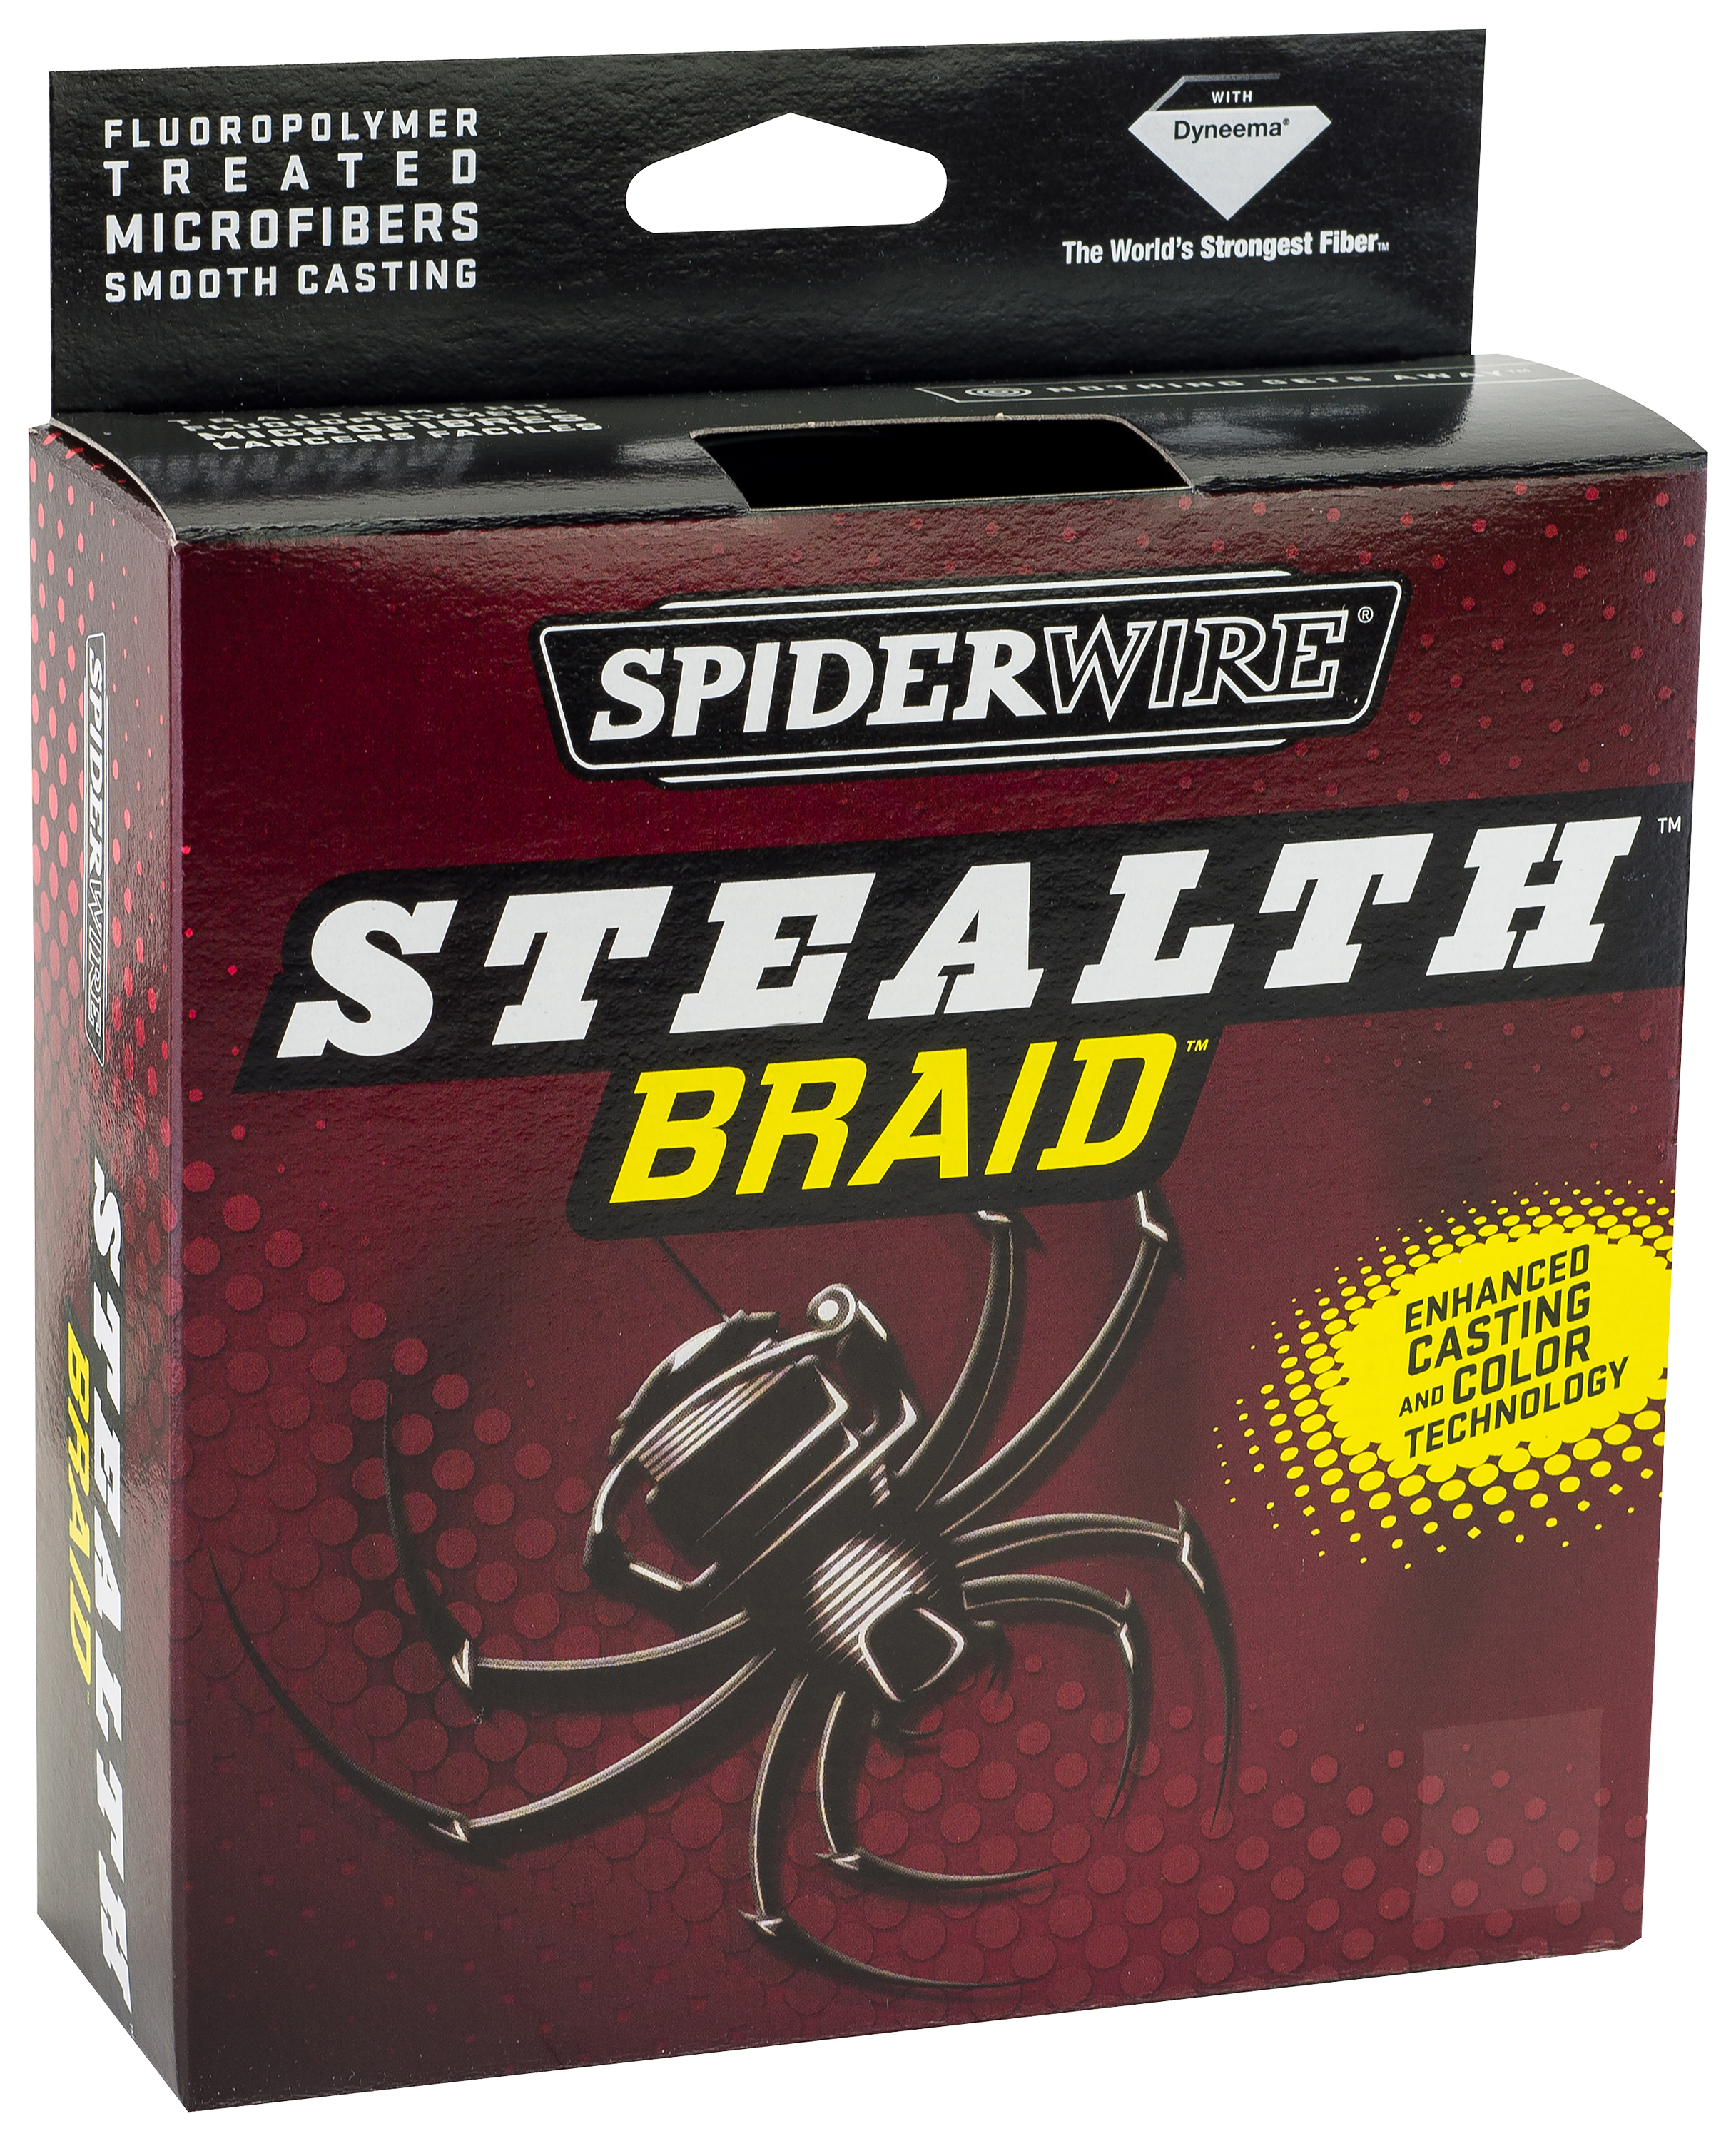 Spiderwire Stealth Braid Fishing Line, Translucent, 125 Yard Spools #SCS/T  - Al Flaherty's Outdoor Store